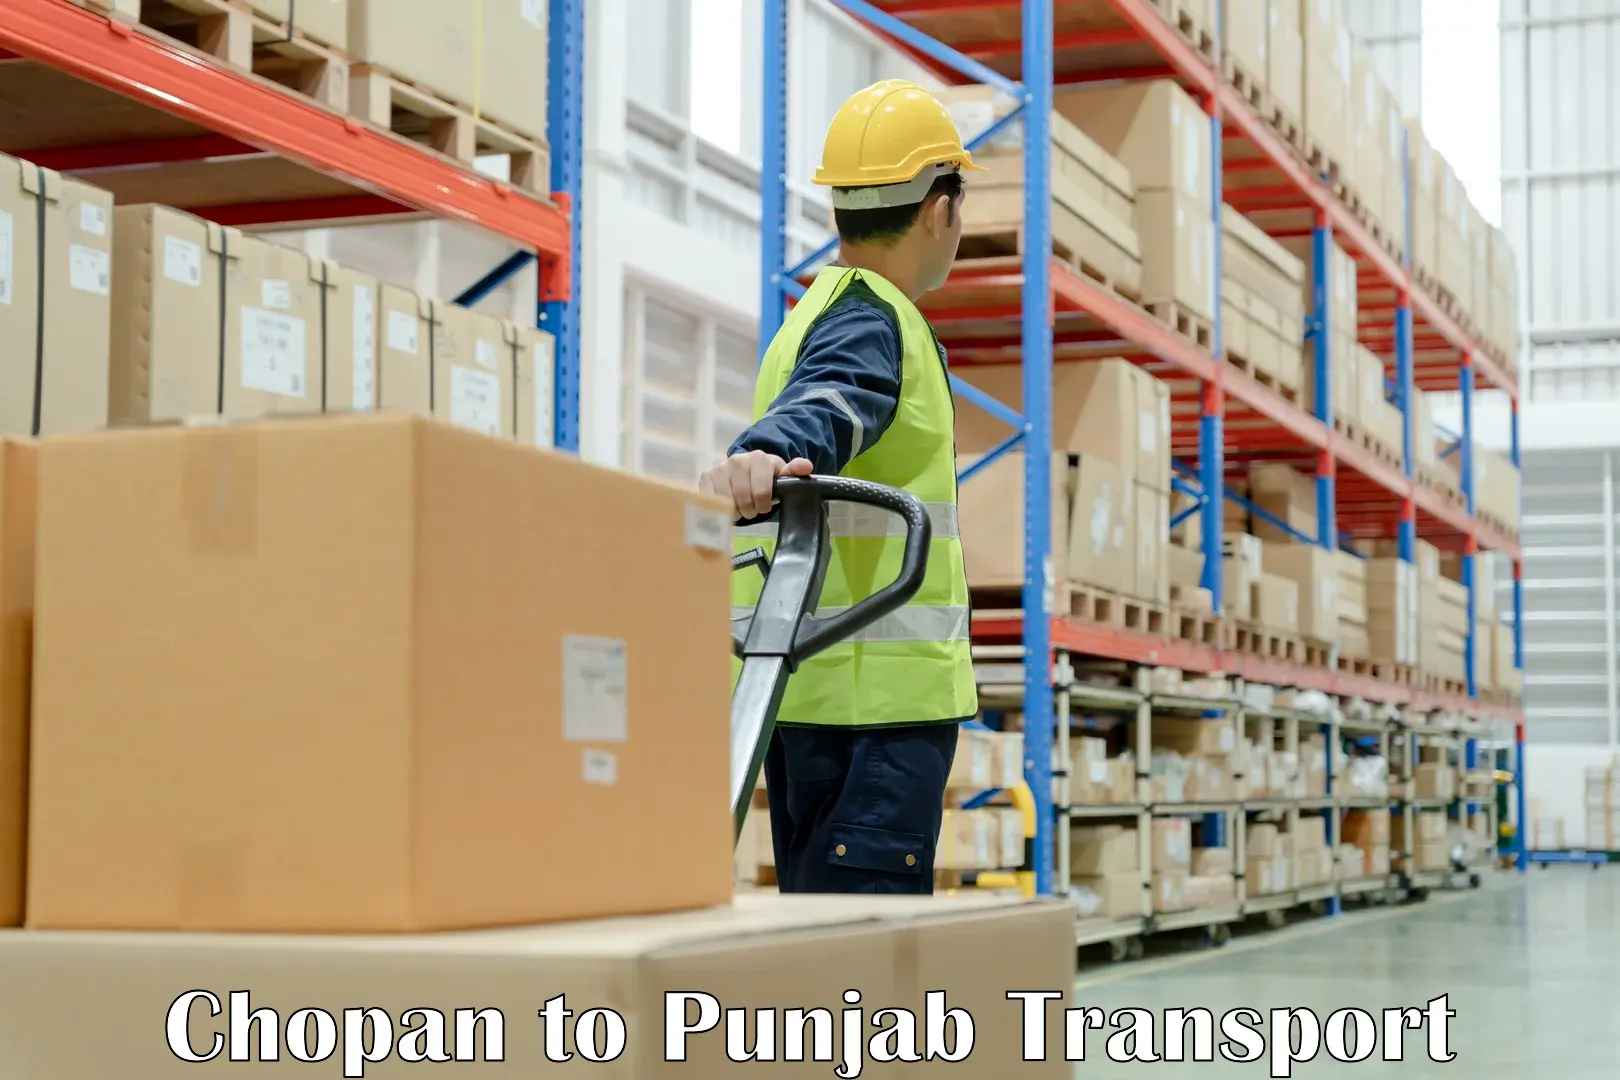 Truck transport companies in India Chopan to Sultanpur Lodhi